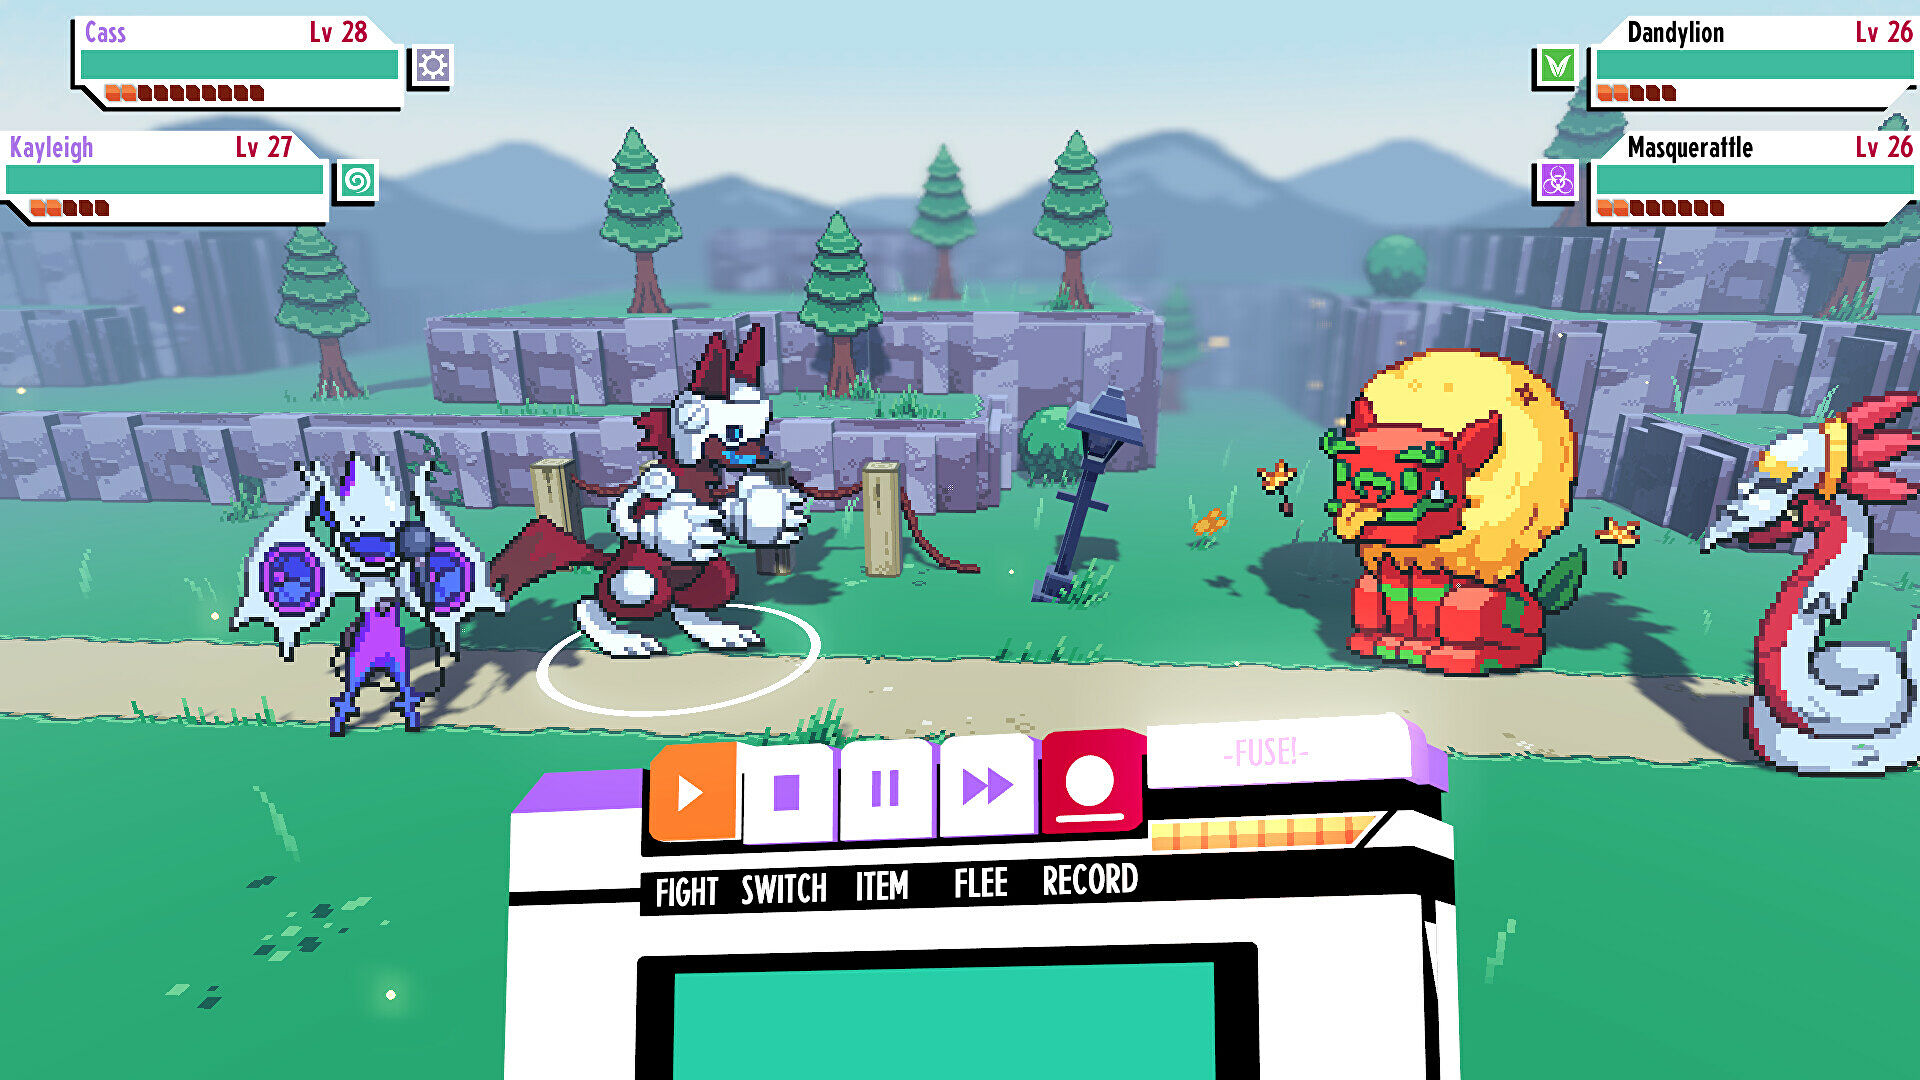 Cassette Beasts is monster-collecting RPG that’s more Power Rangers than Pokémon